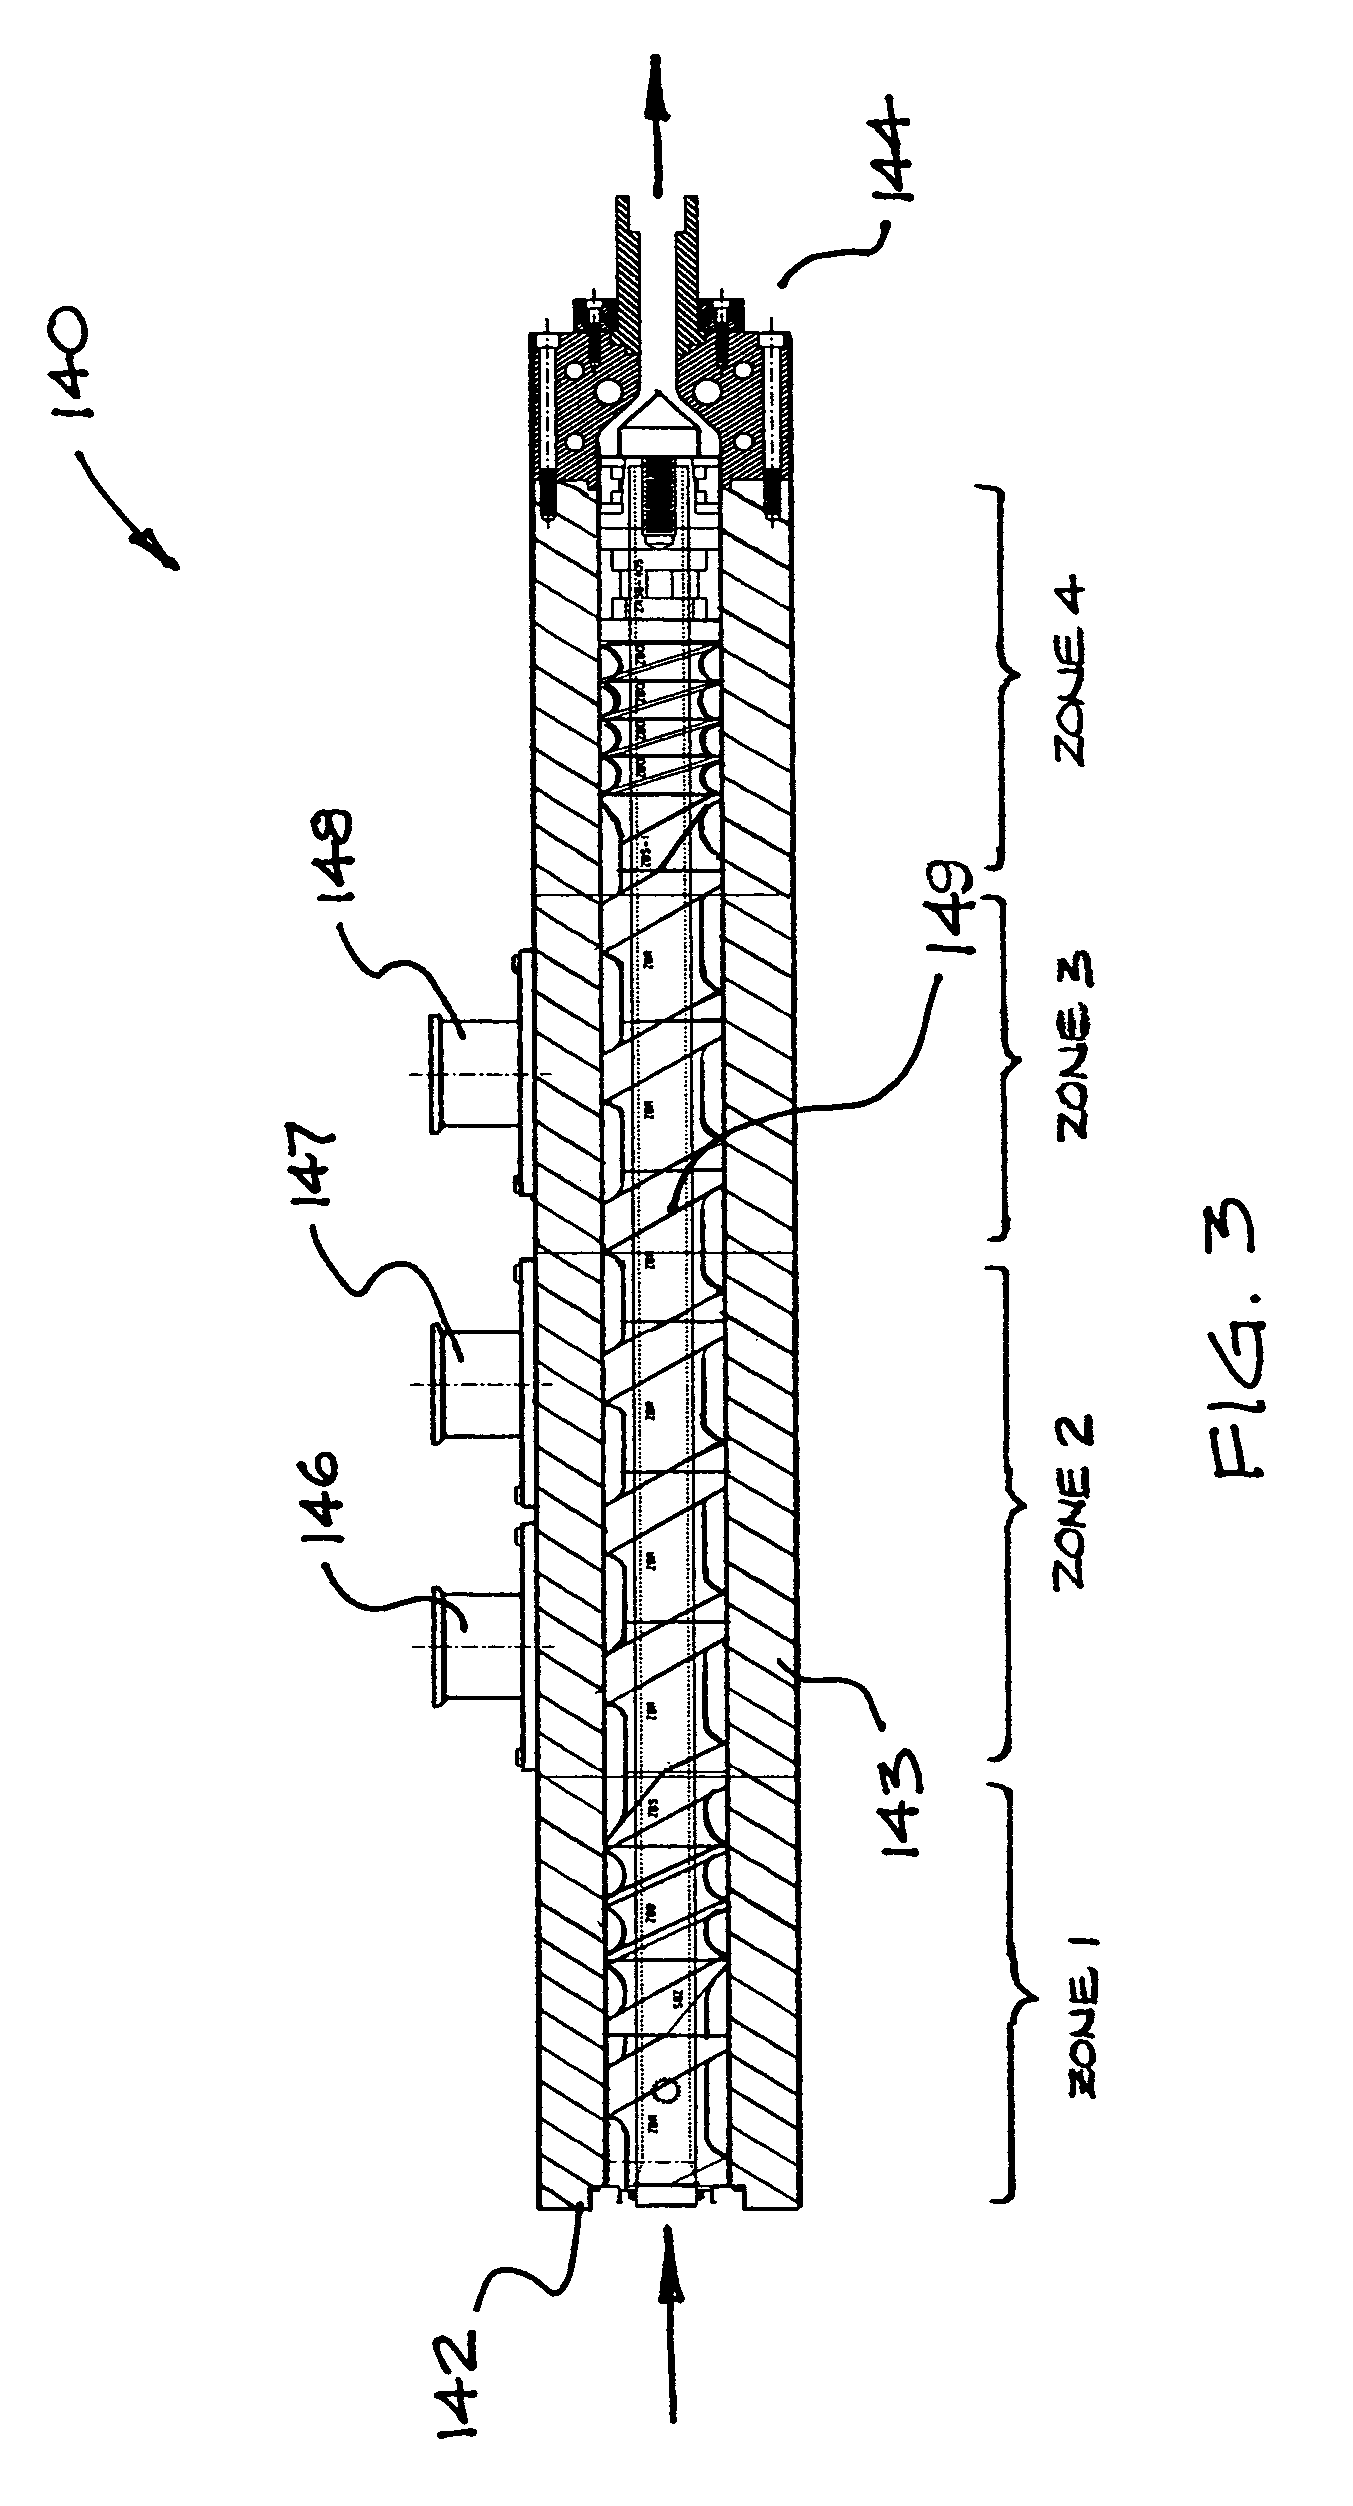 Non-gelatin film and method and apparatus for producing same